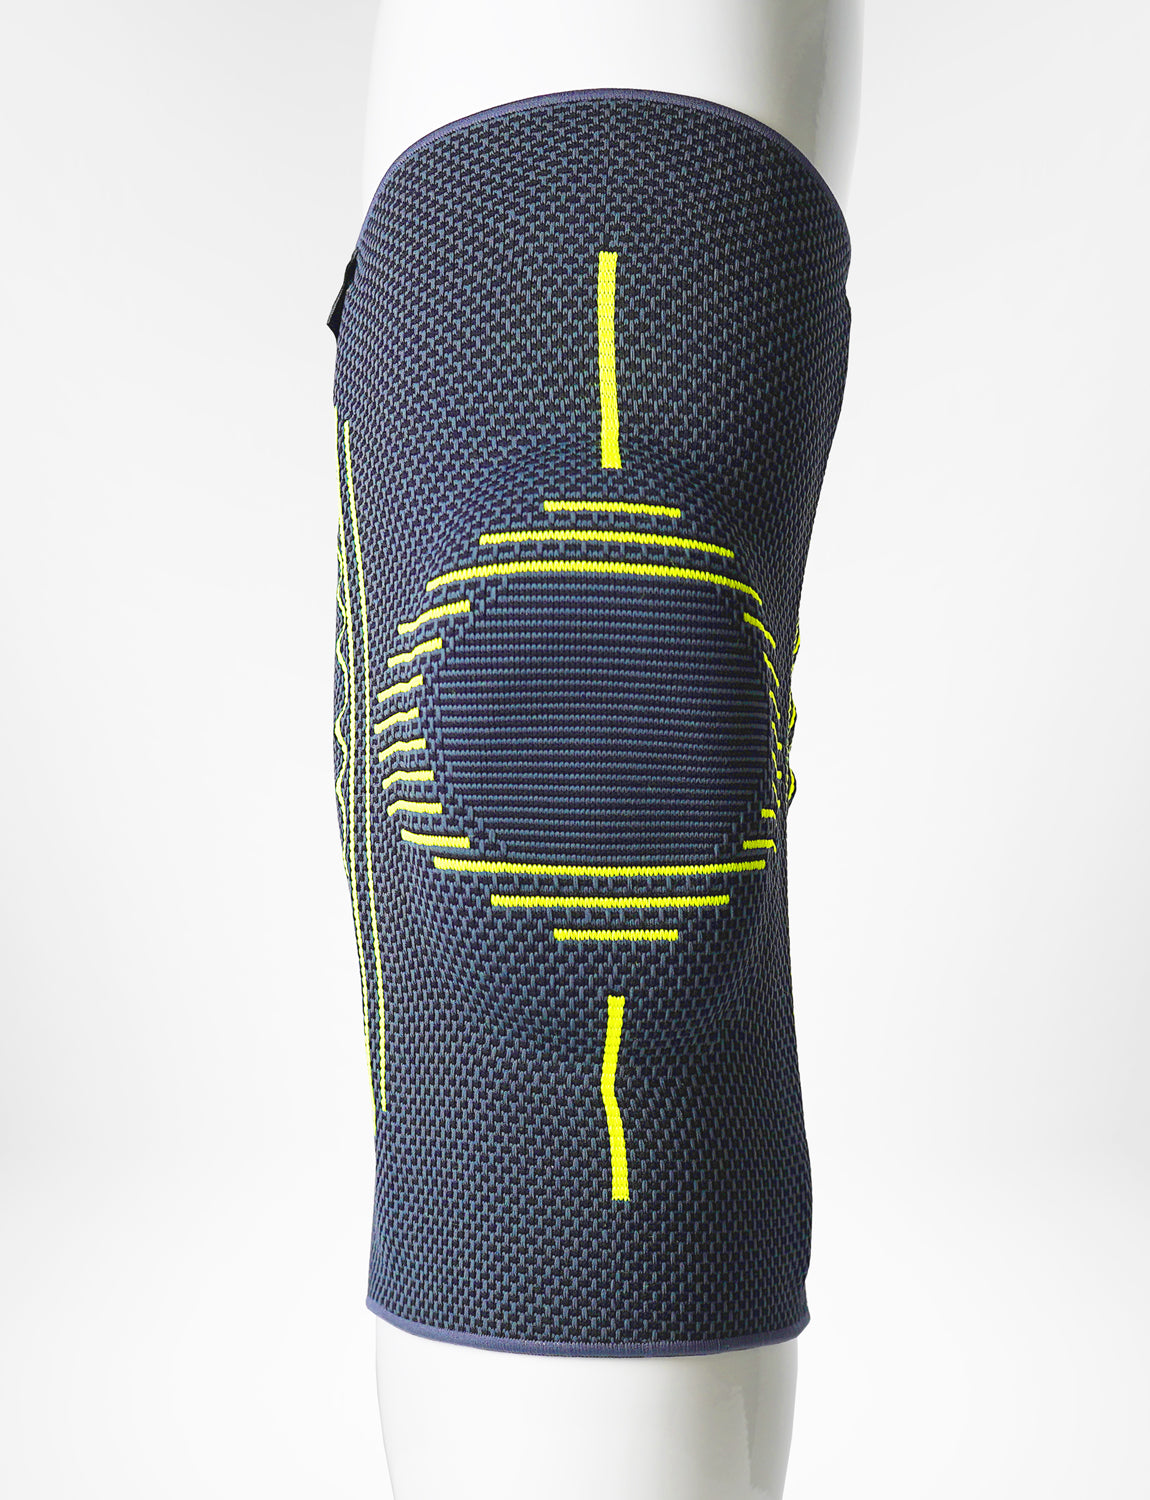 A close-up of a Neo G USA Active Plus Knee Support with blue knee brace with yellow accents and multi-zone compression, displayed on a mannequin leg against a white background.